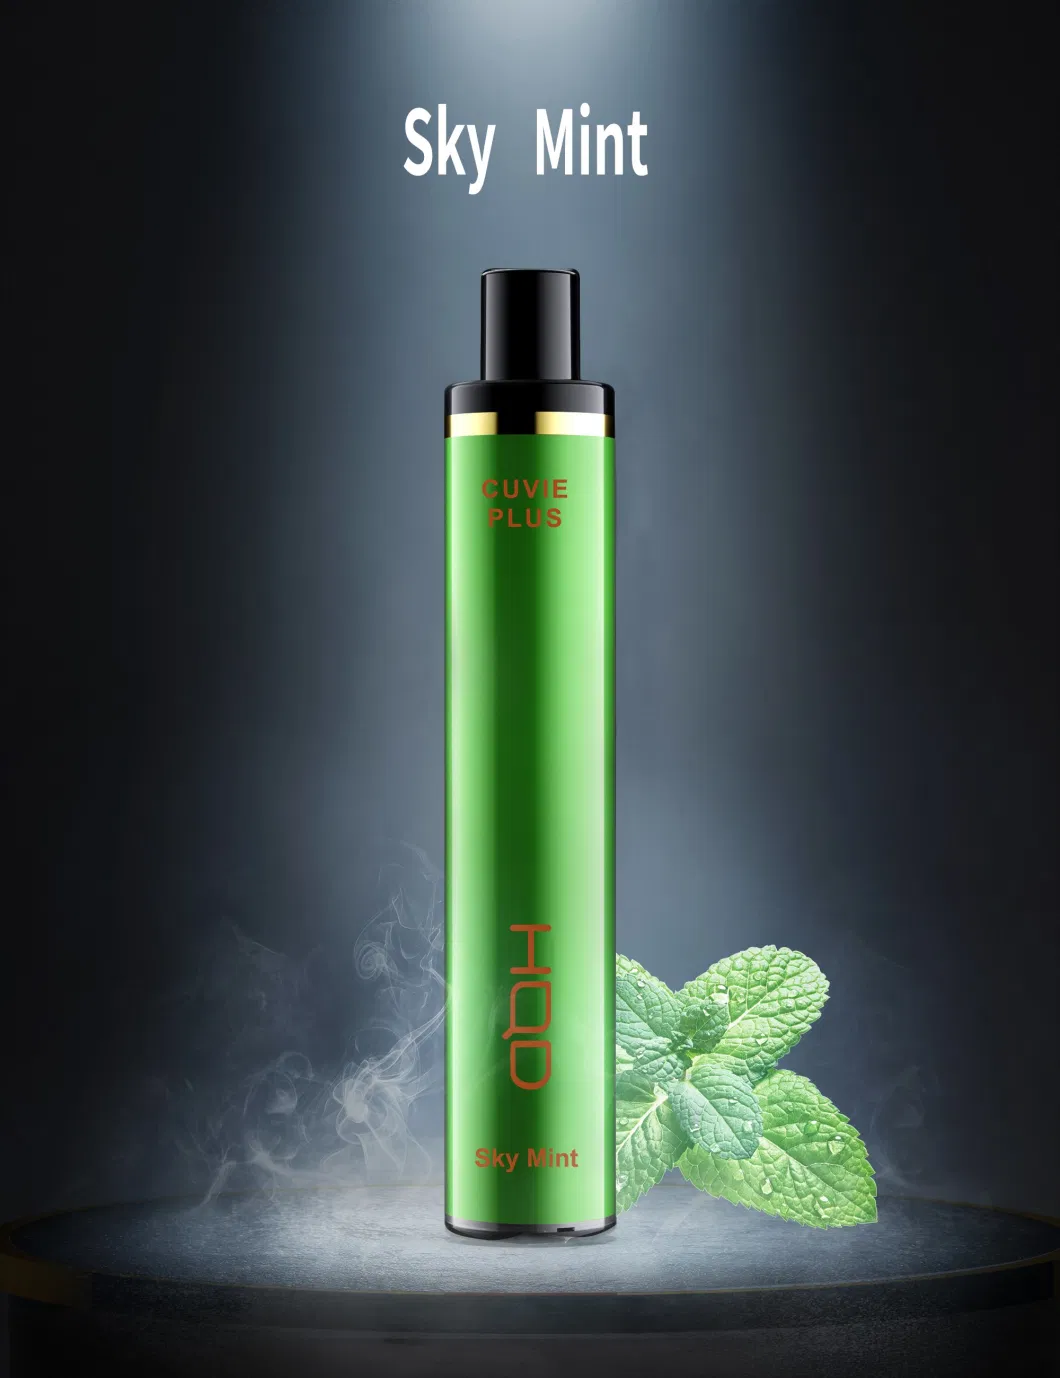 Hotbox Vape Rechargeable Refill Hqd 1200 Cuvie Tpd Registered 0% 2% 3% 5% Best Juice 300 600 1600 2000 2800 3000 3500 4000 5000 6000 7000 8000